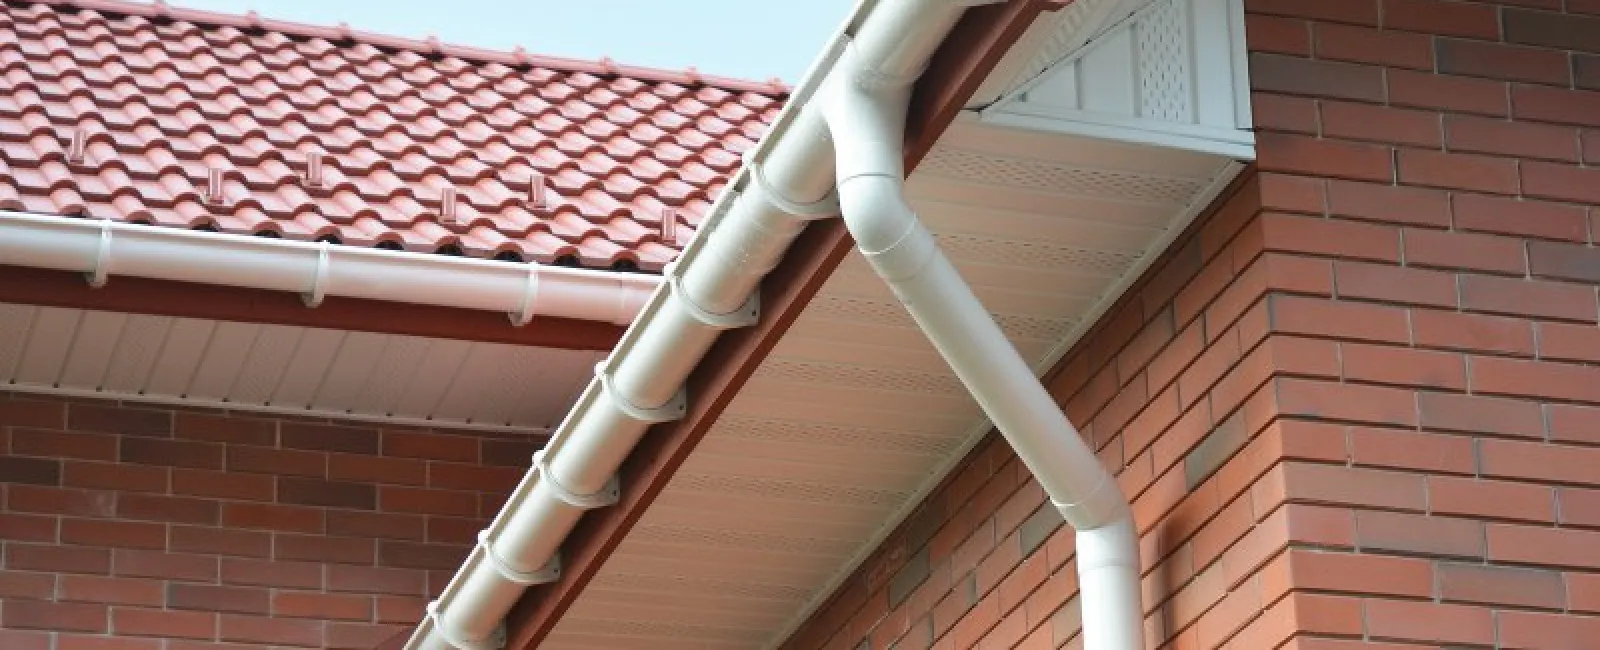 How Overflowing Gutters Cause Problems for Your Home